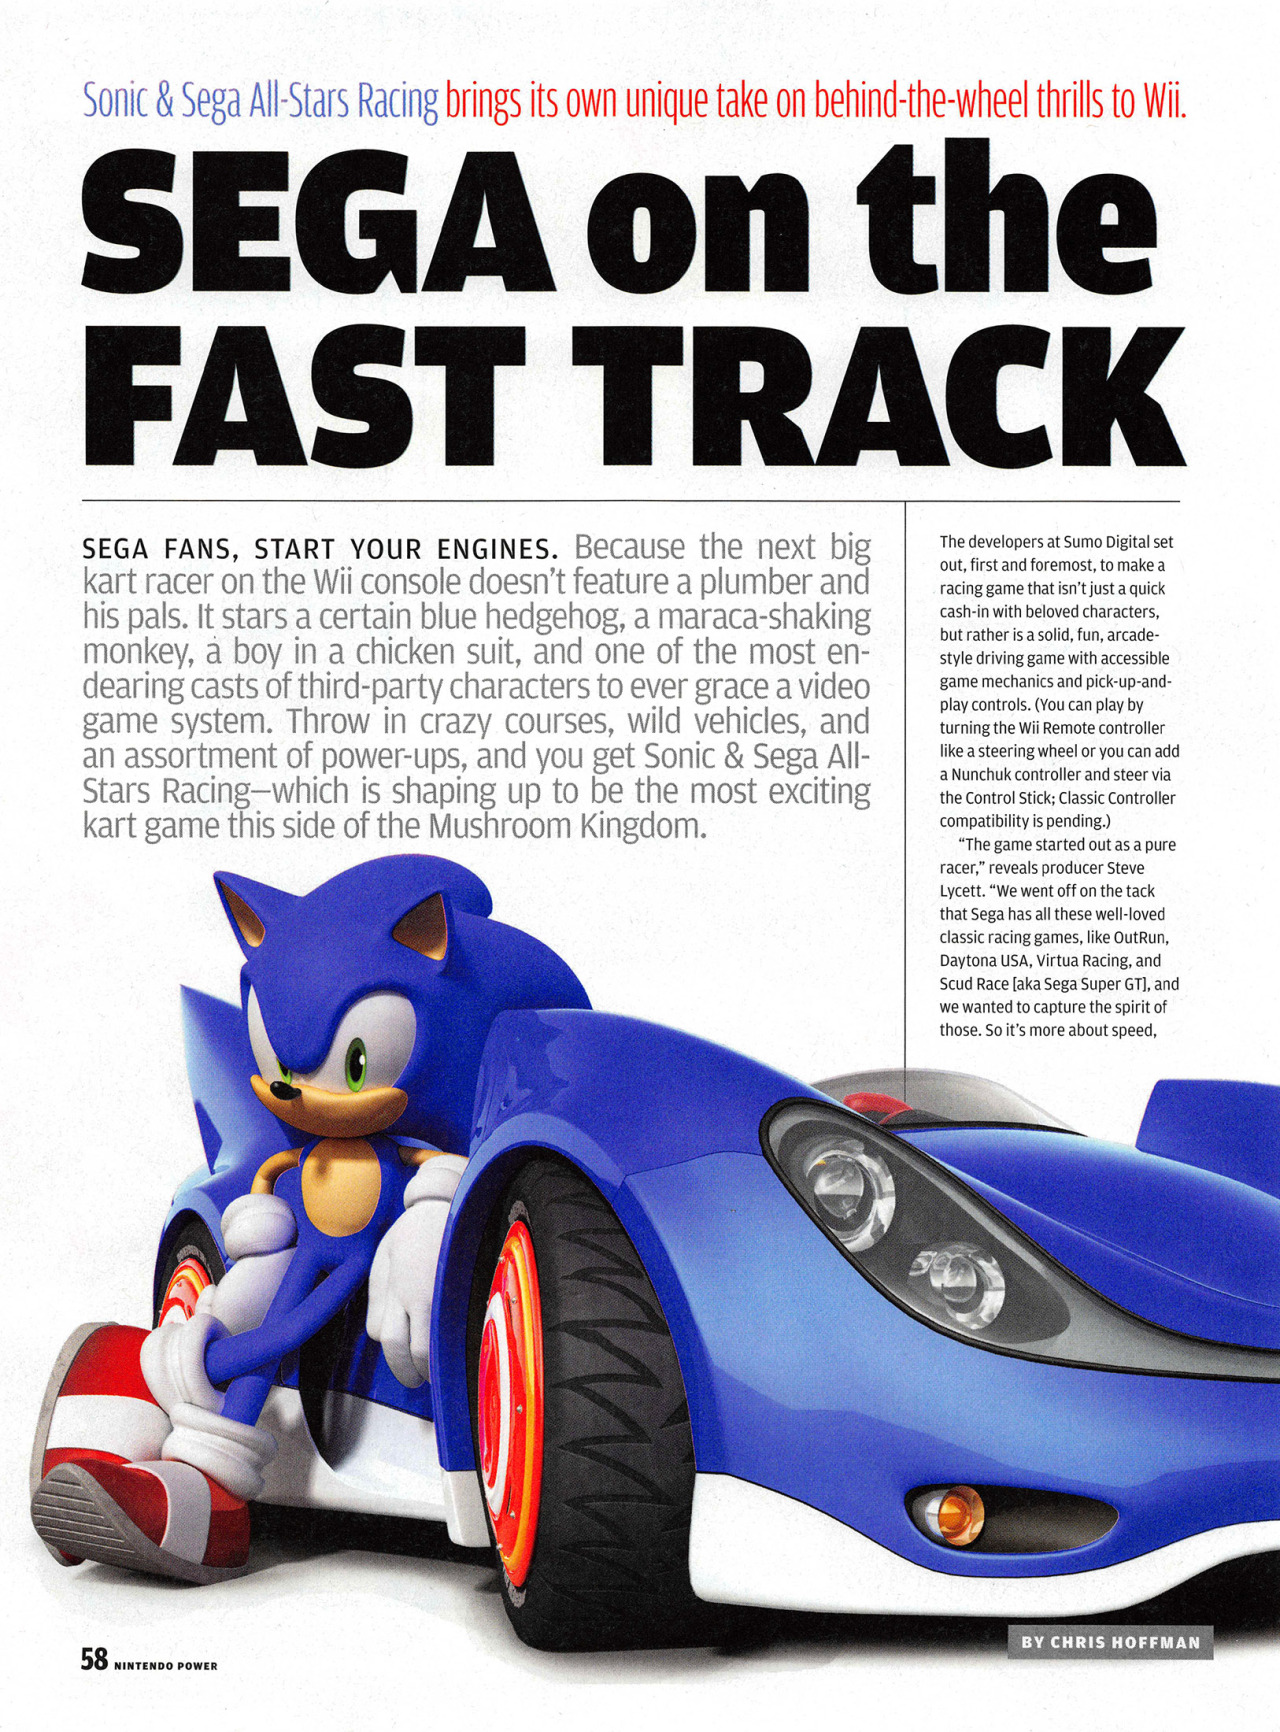  #Sonic and Sega All Stars Racing  #sonic the hedgehog  #Miles Tails Prower